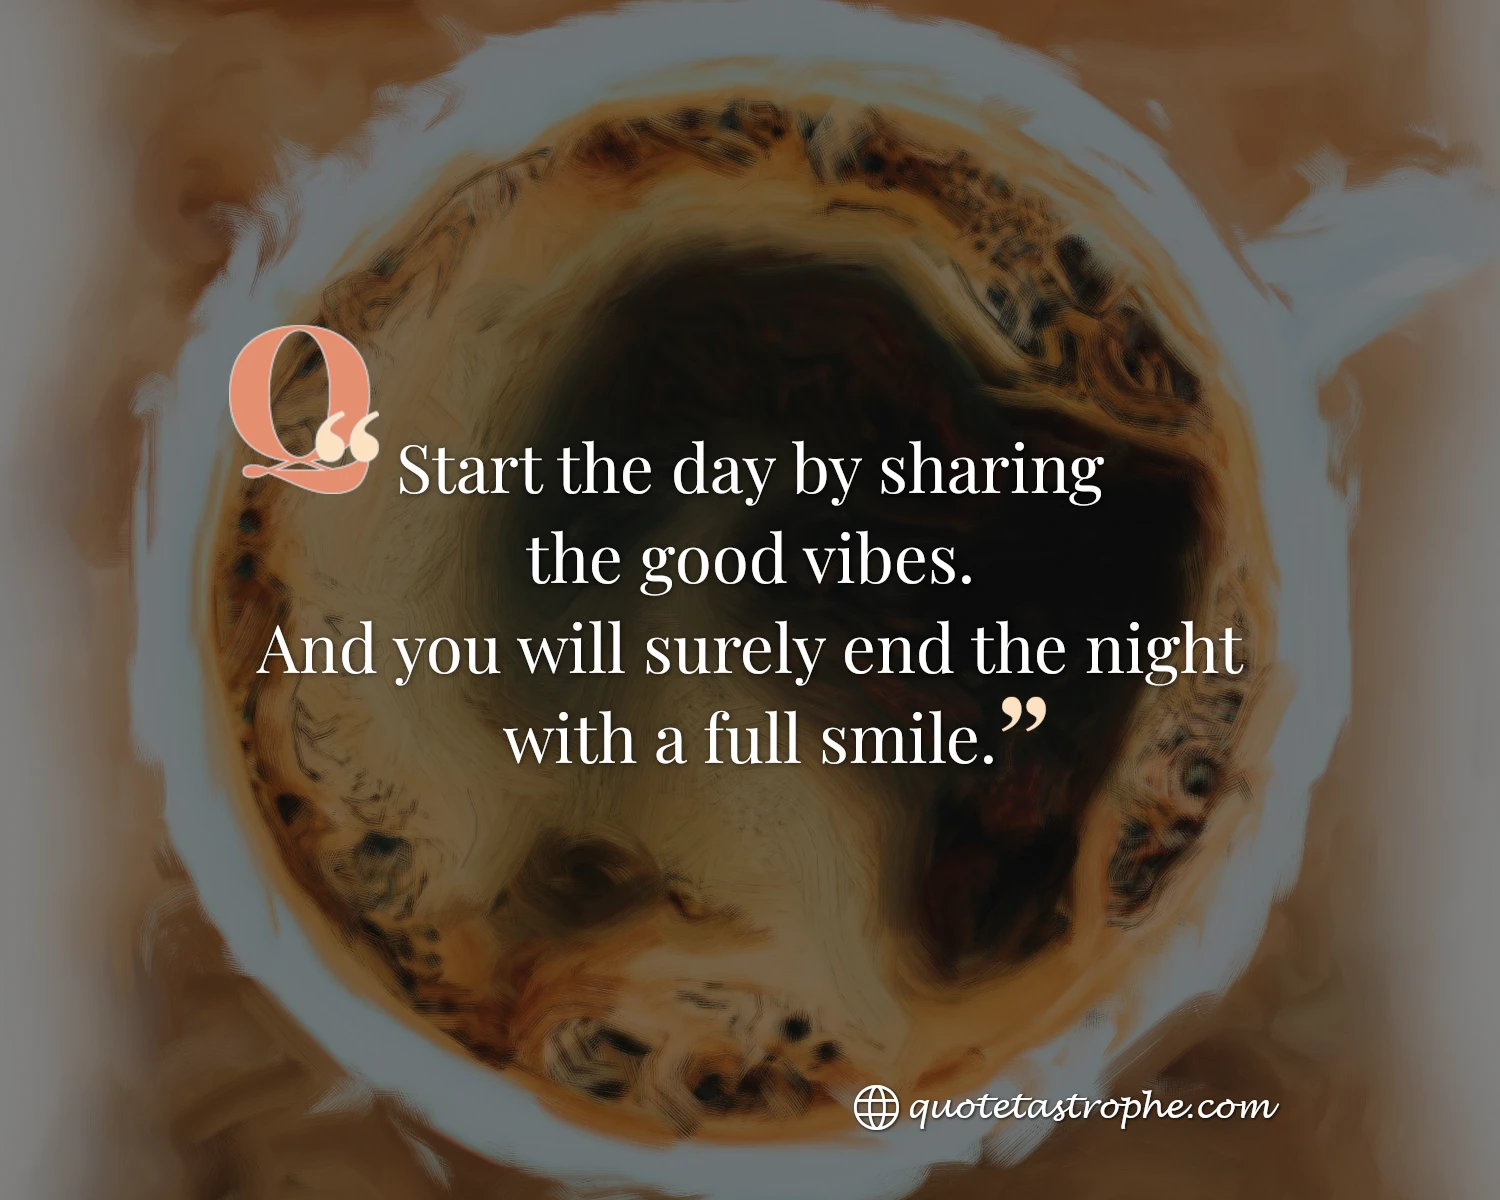 Start The Day by Sharing The Good Vibes